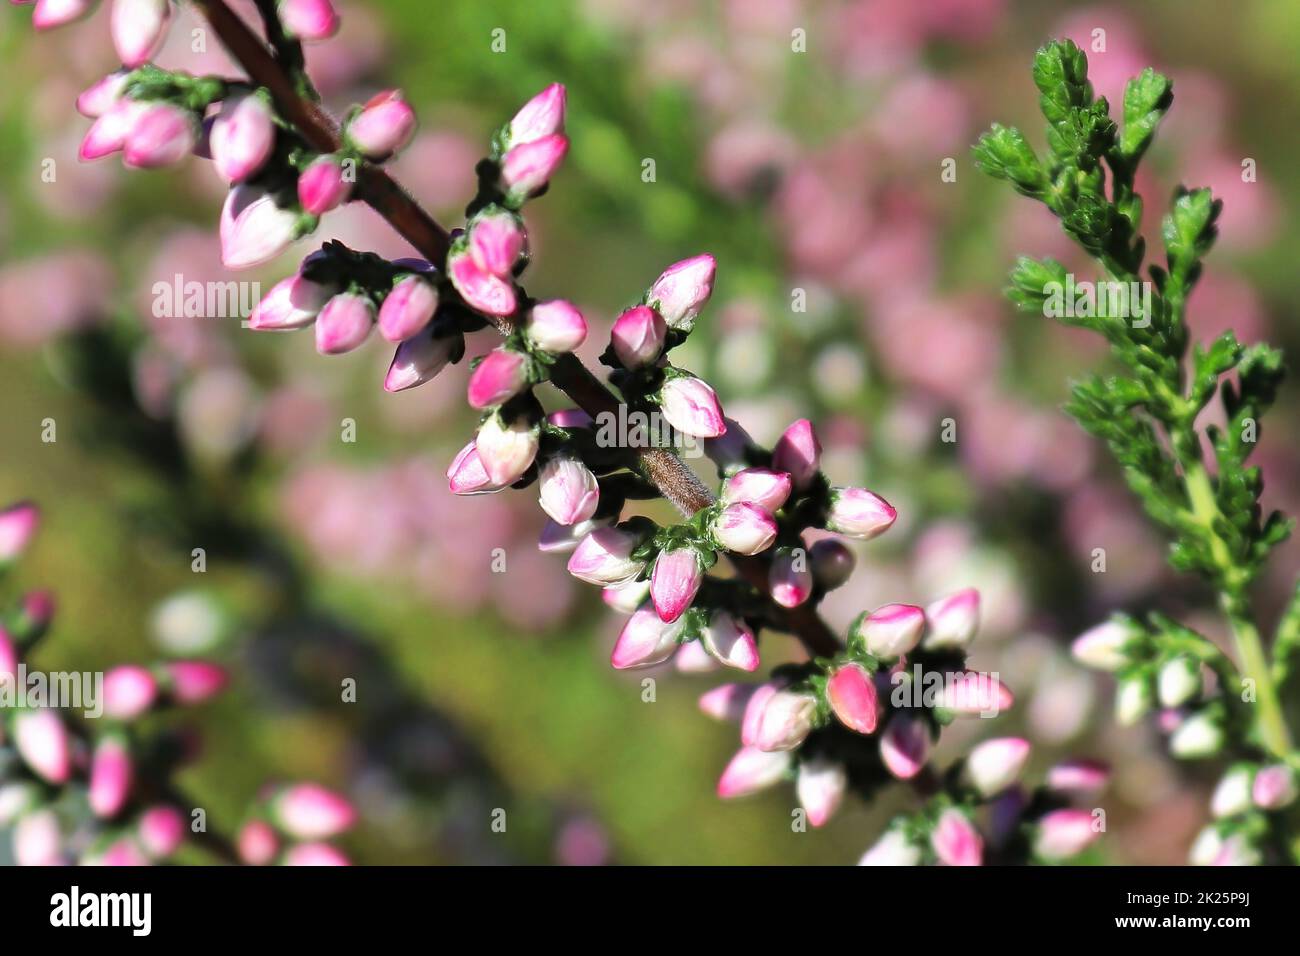 Macro of delicate flowers on a Heather plant Stock Photo